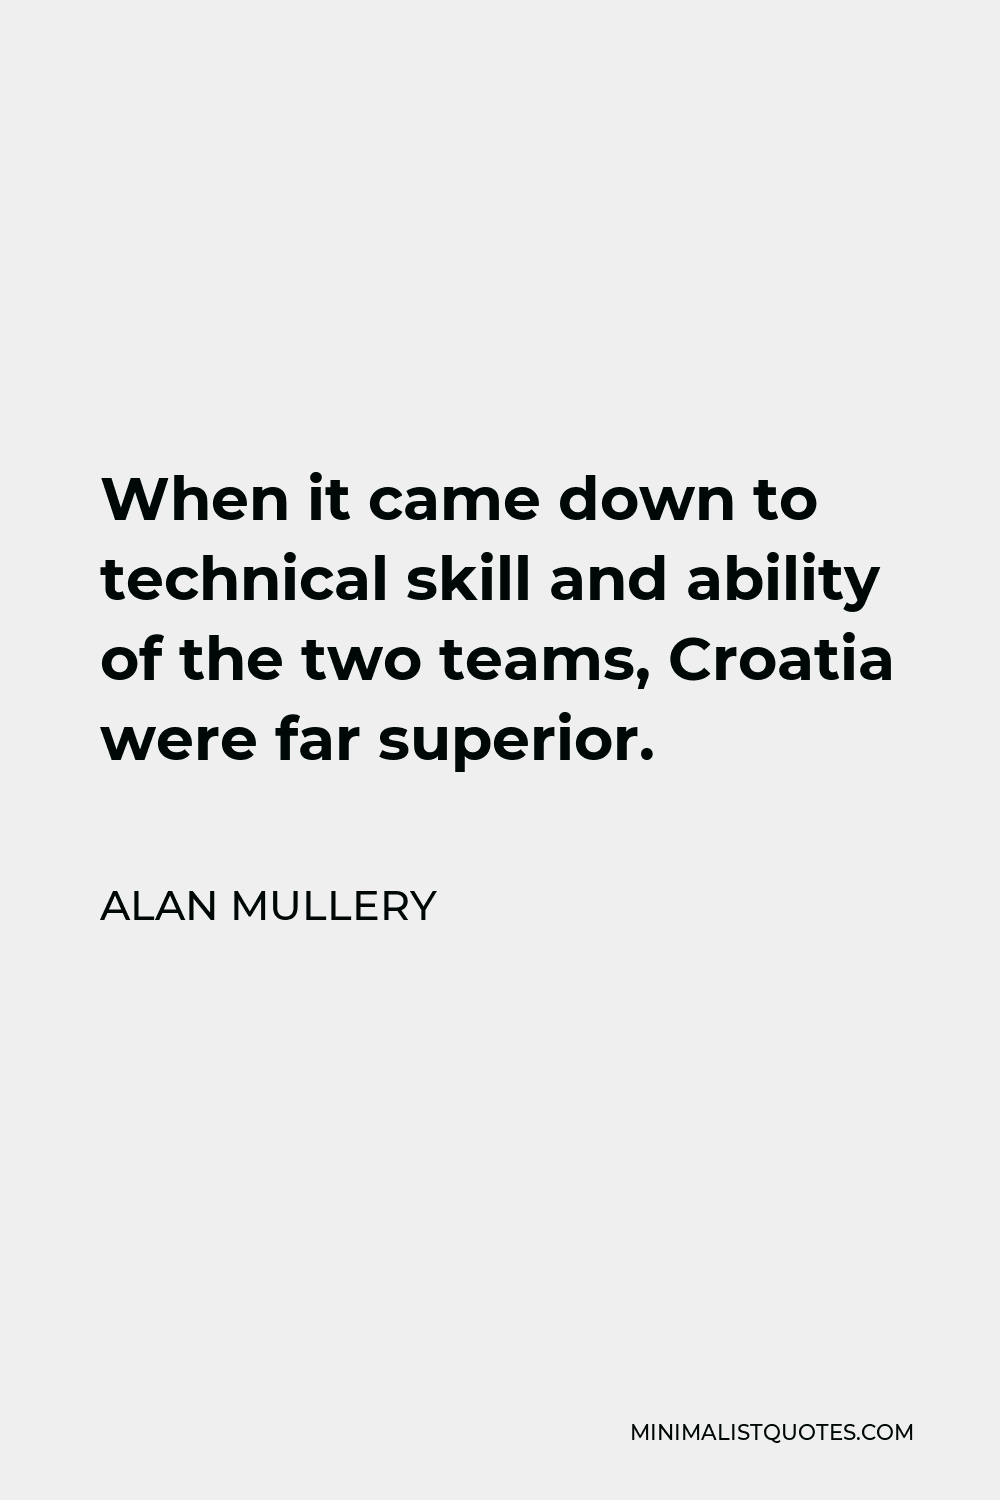 Alan Mullery Quote - When it came down to technical skill and ability of the two teams, Croatia were far superior.